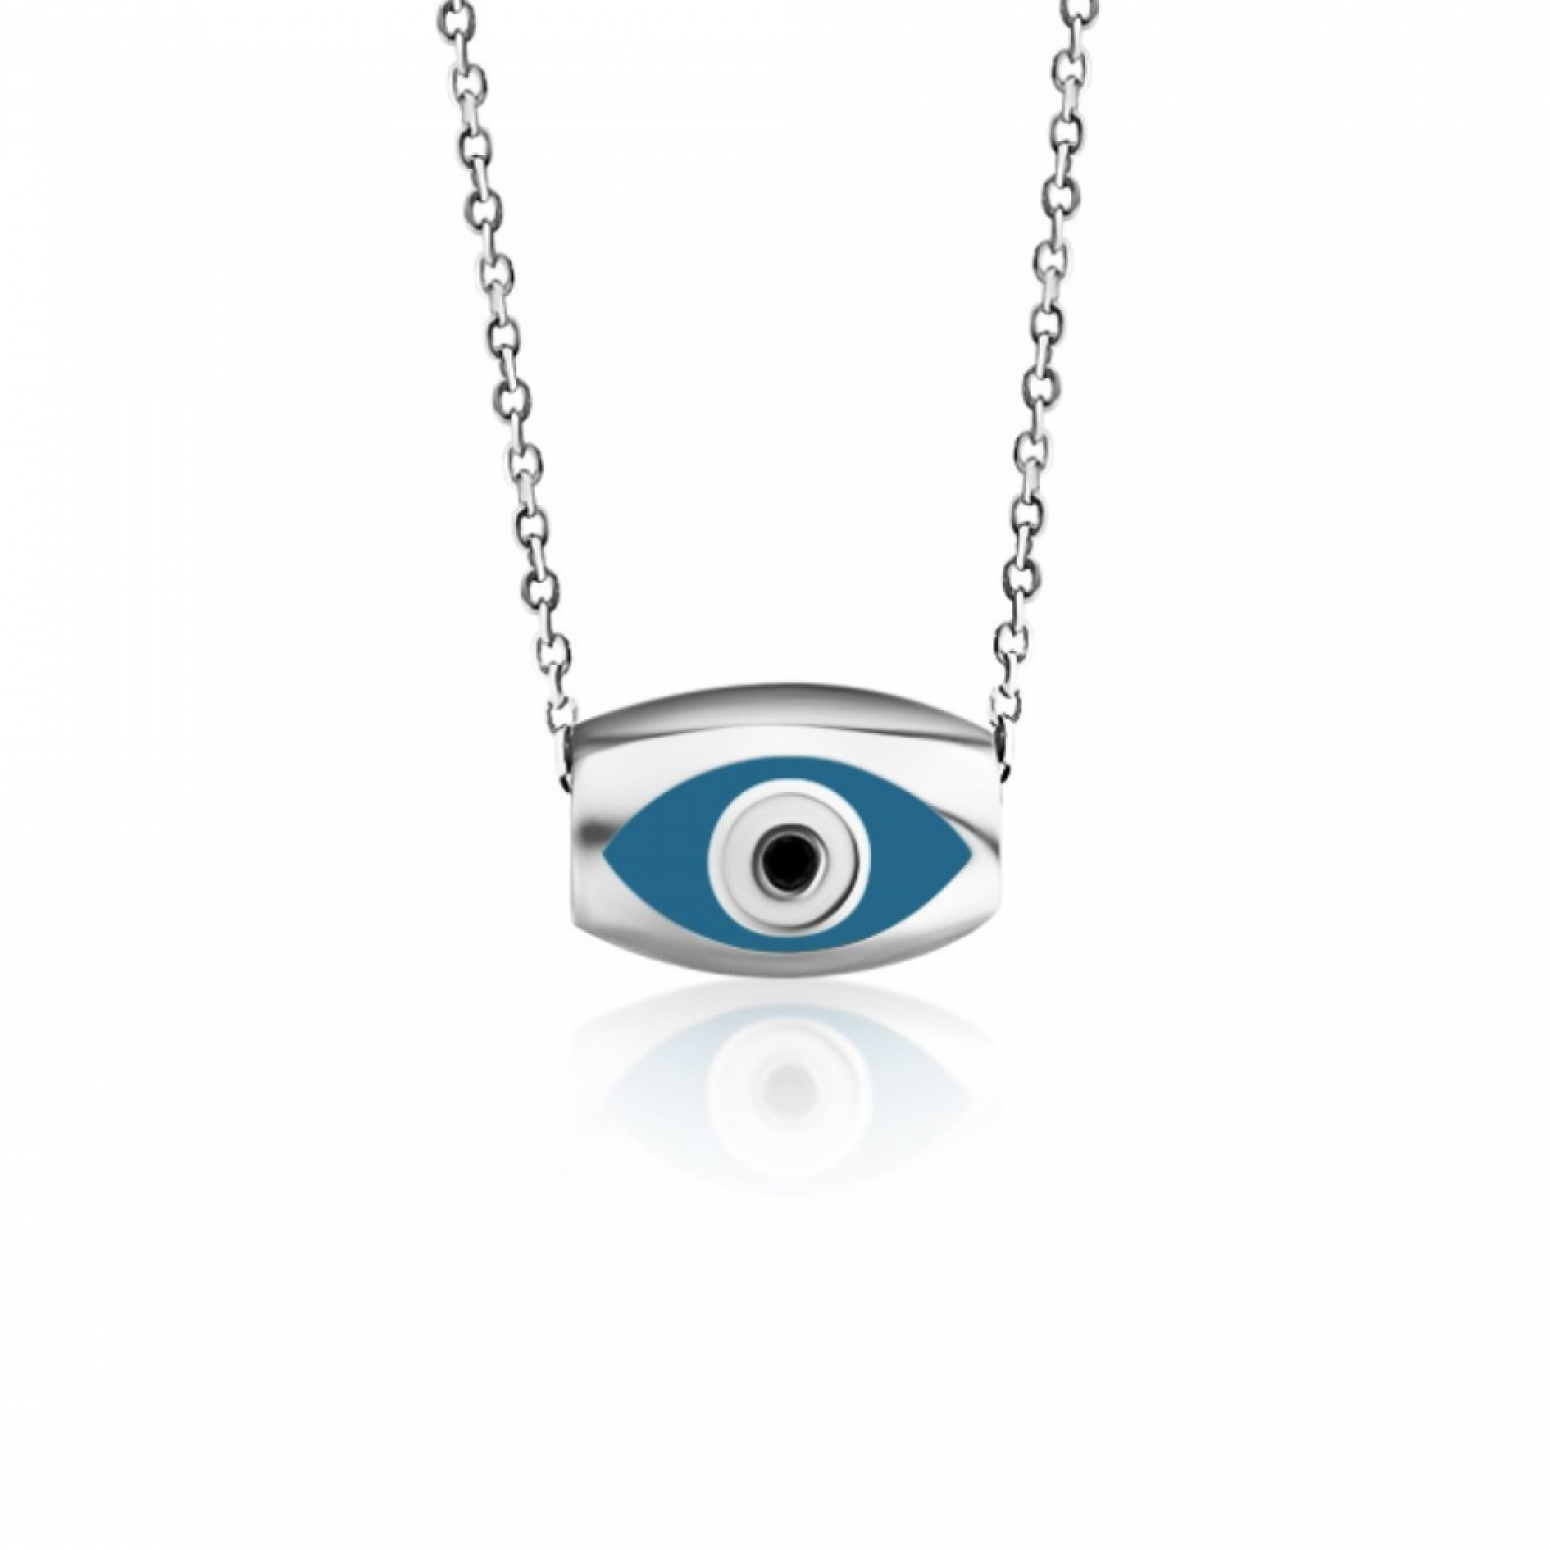 Eye necklace, Κ9 white gold with enamel and spinel, ko5269 NECKLACES Κοσμηματα - chrilia.gr